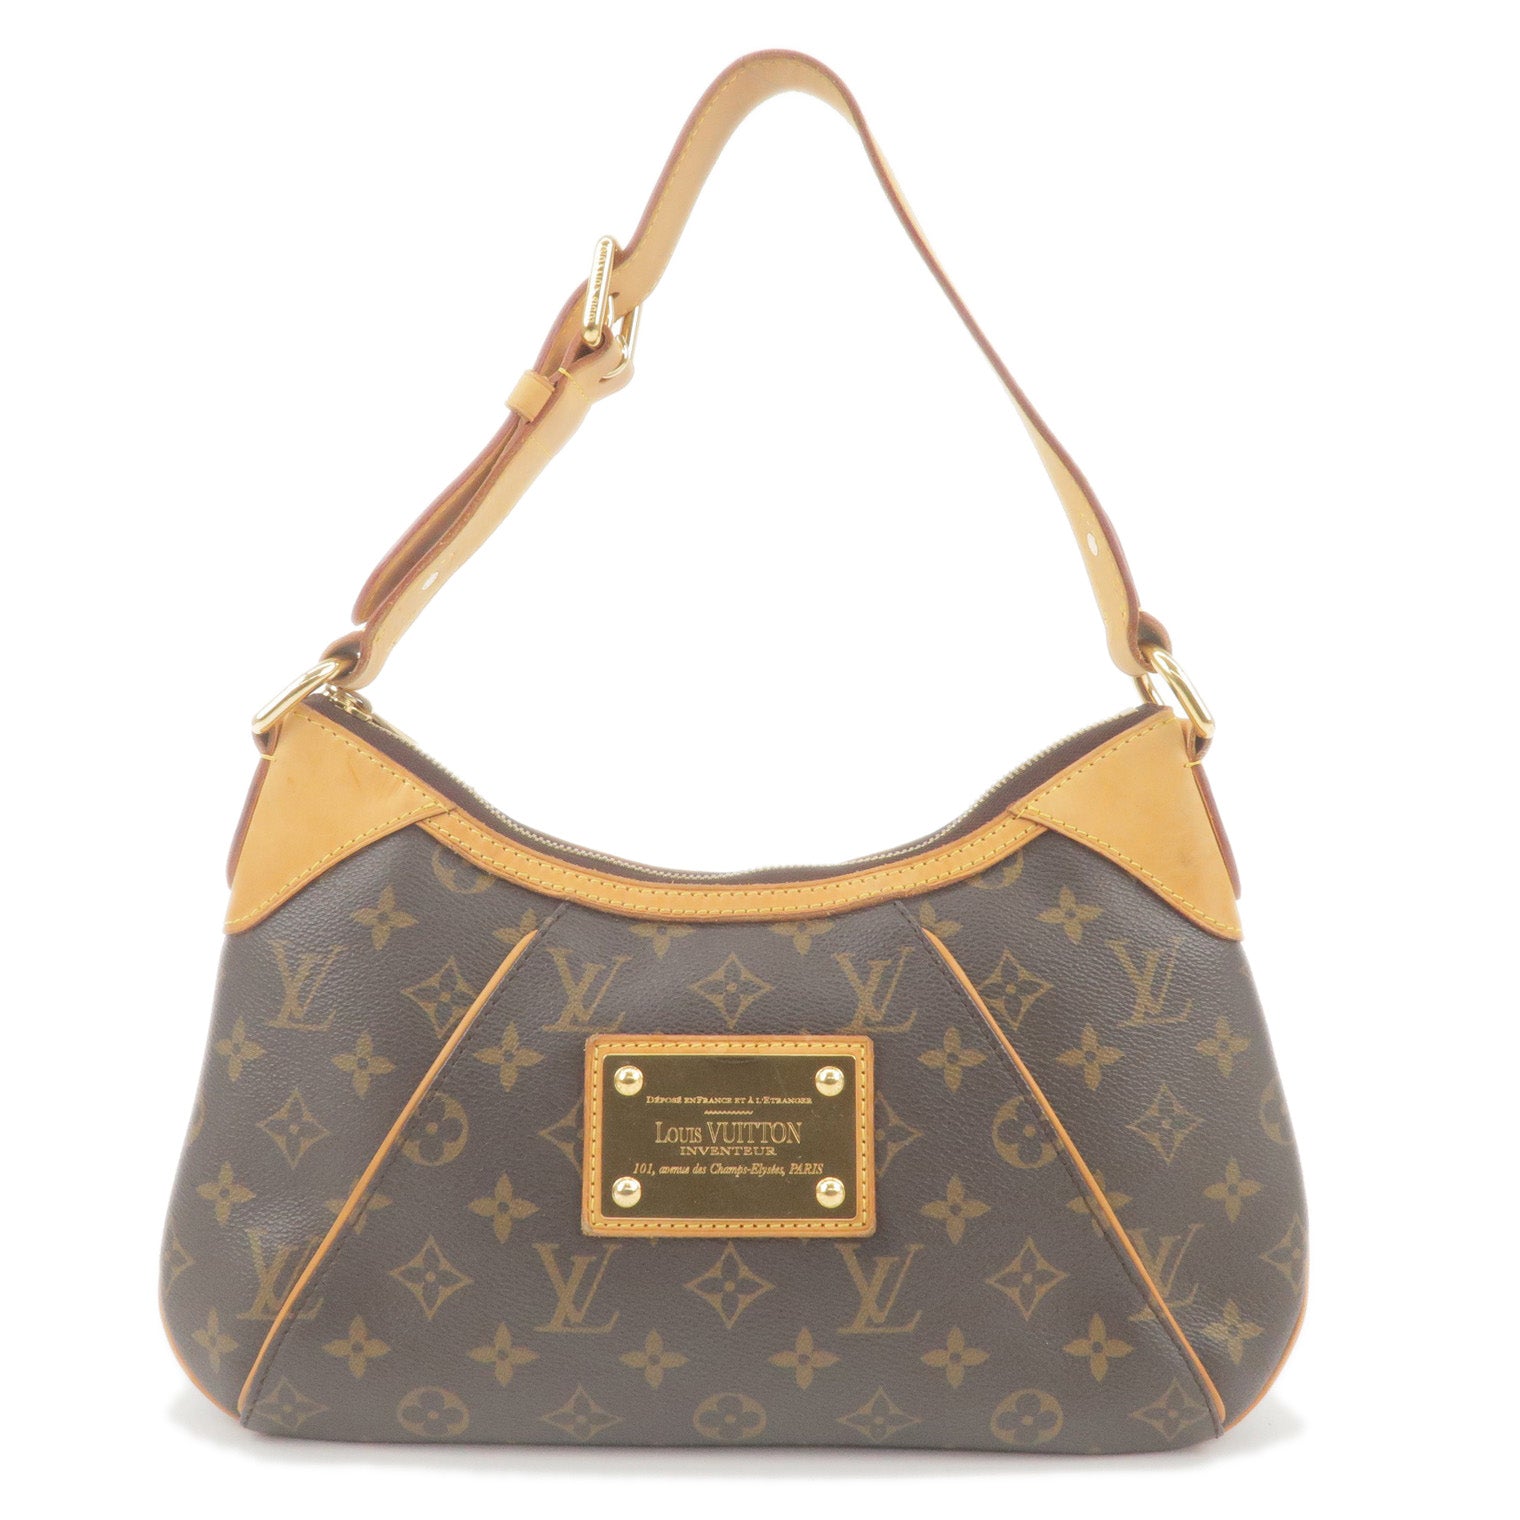 Louis Vuitton goods in China expected to spike by up to 20% - The